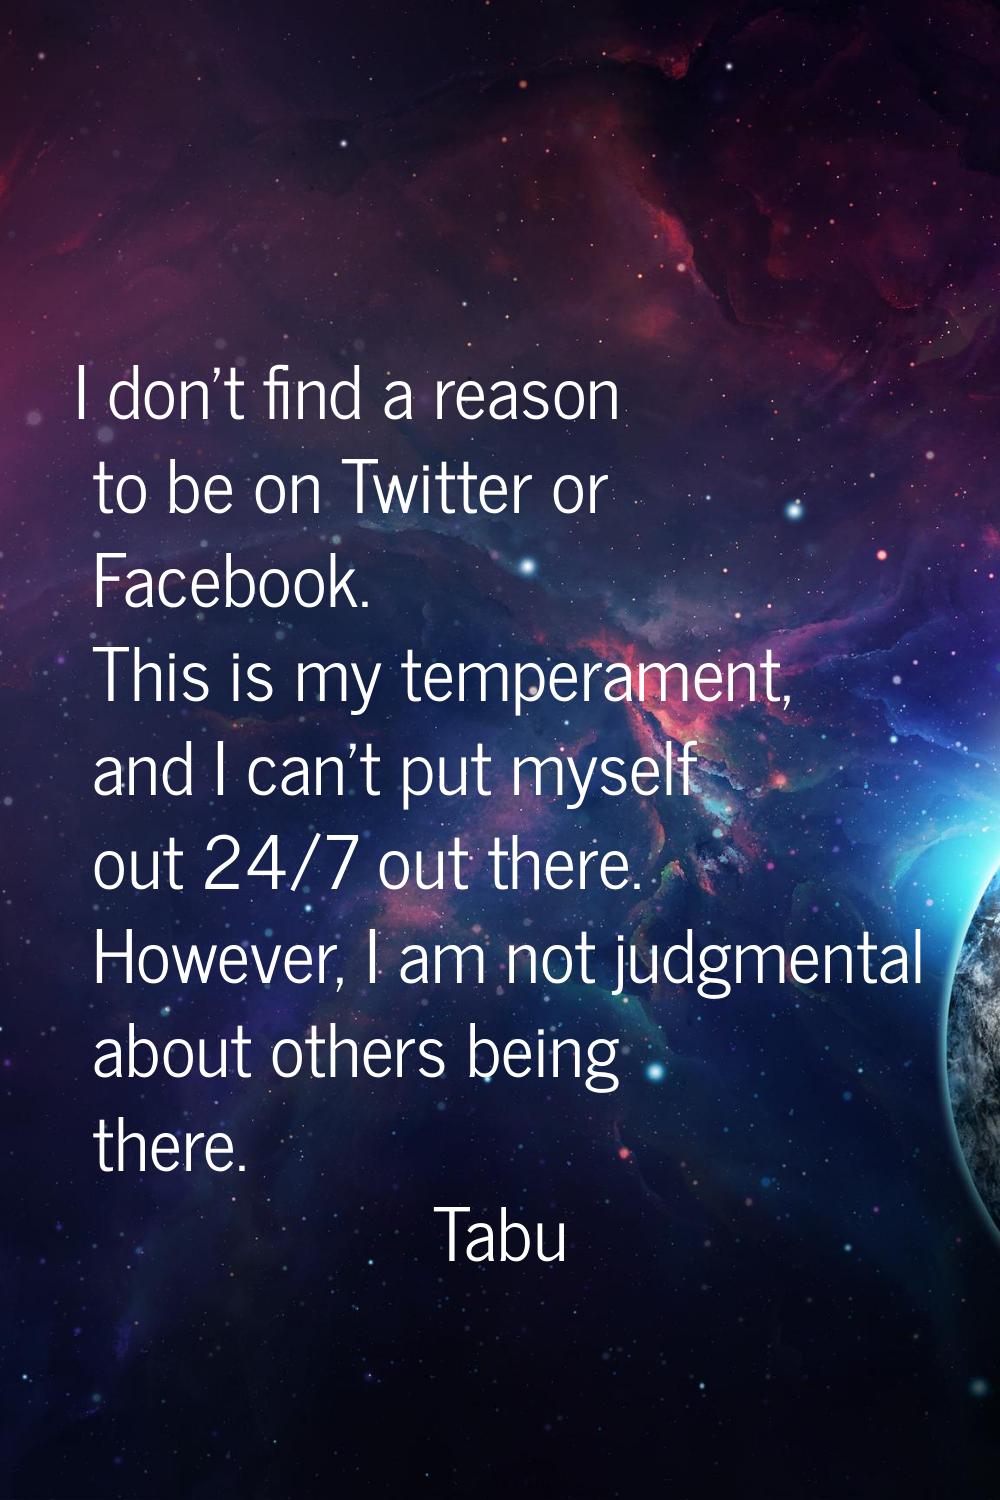 I don't find a reason to be on Twitter or Facebook. This is my temperament, and I can't put myself 